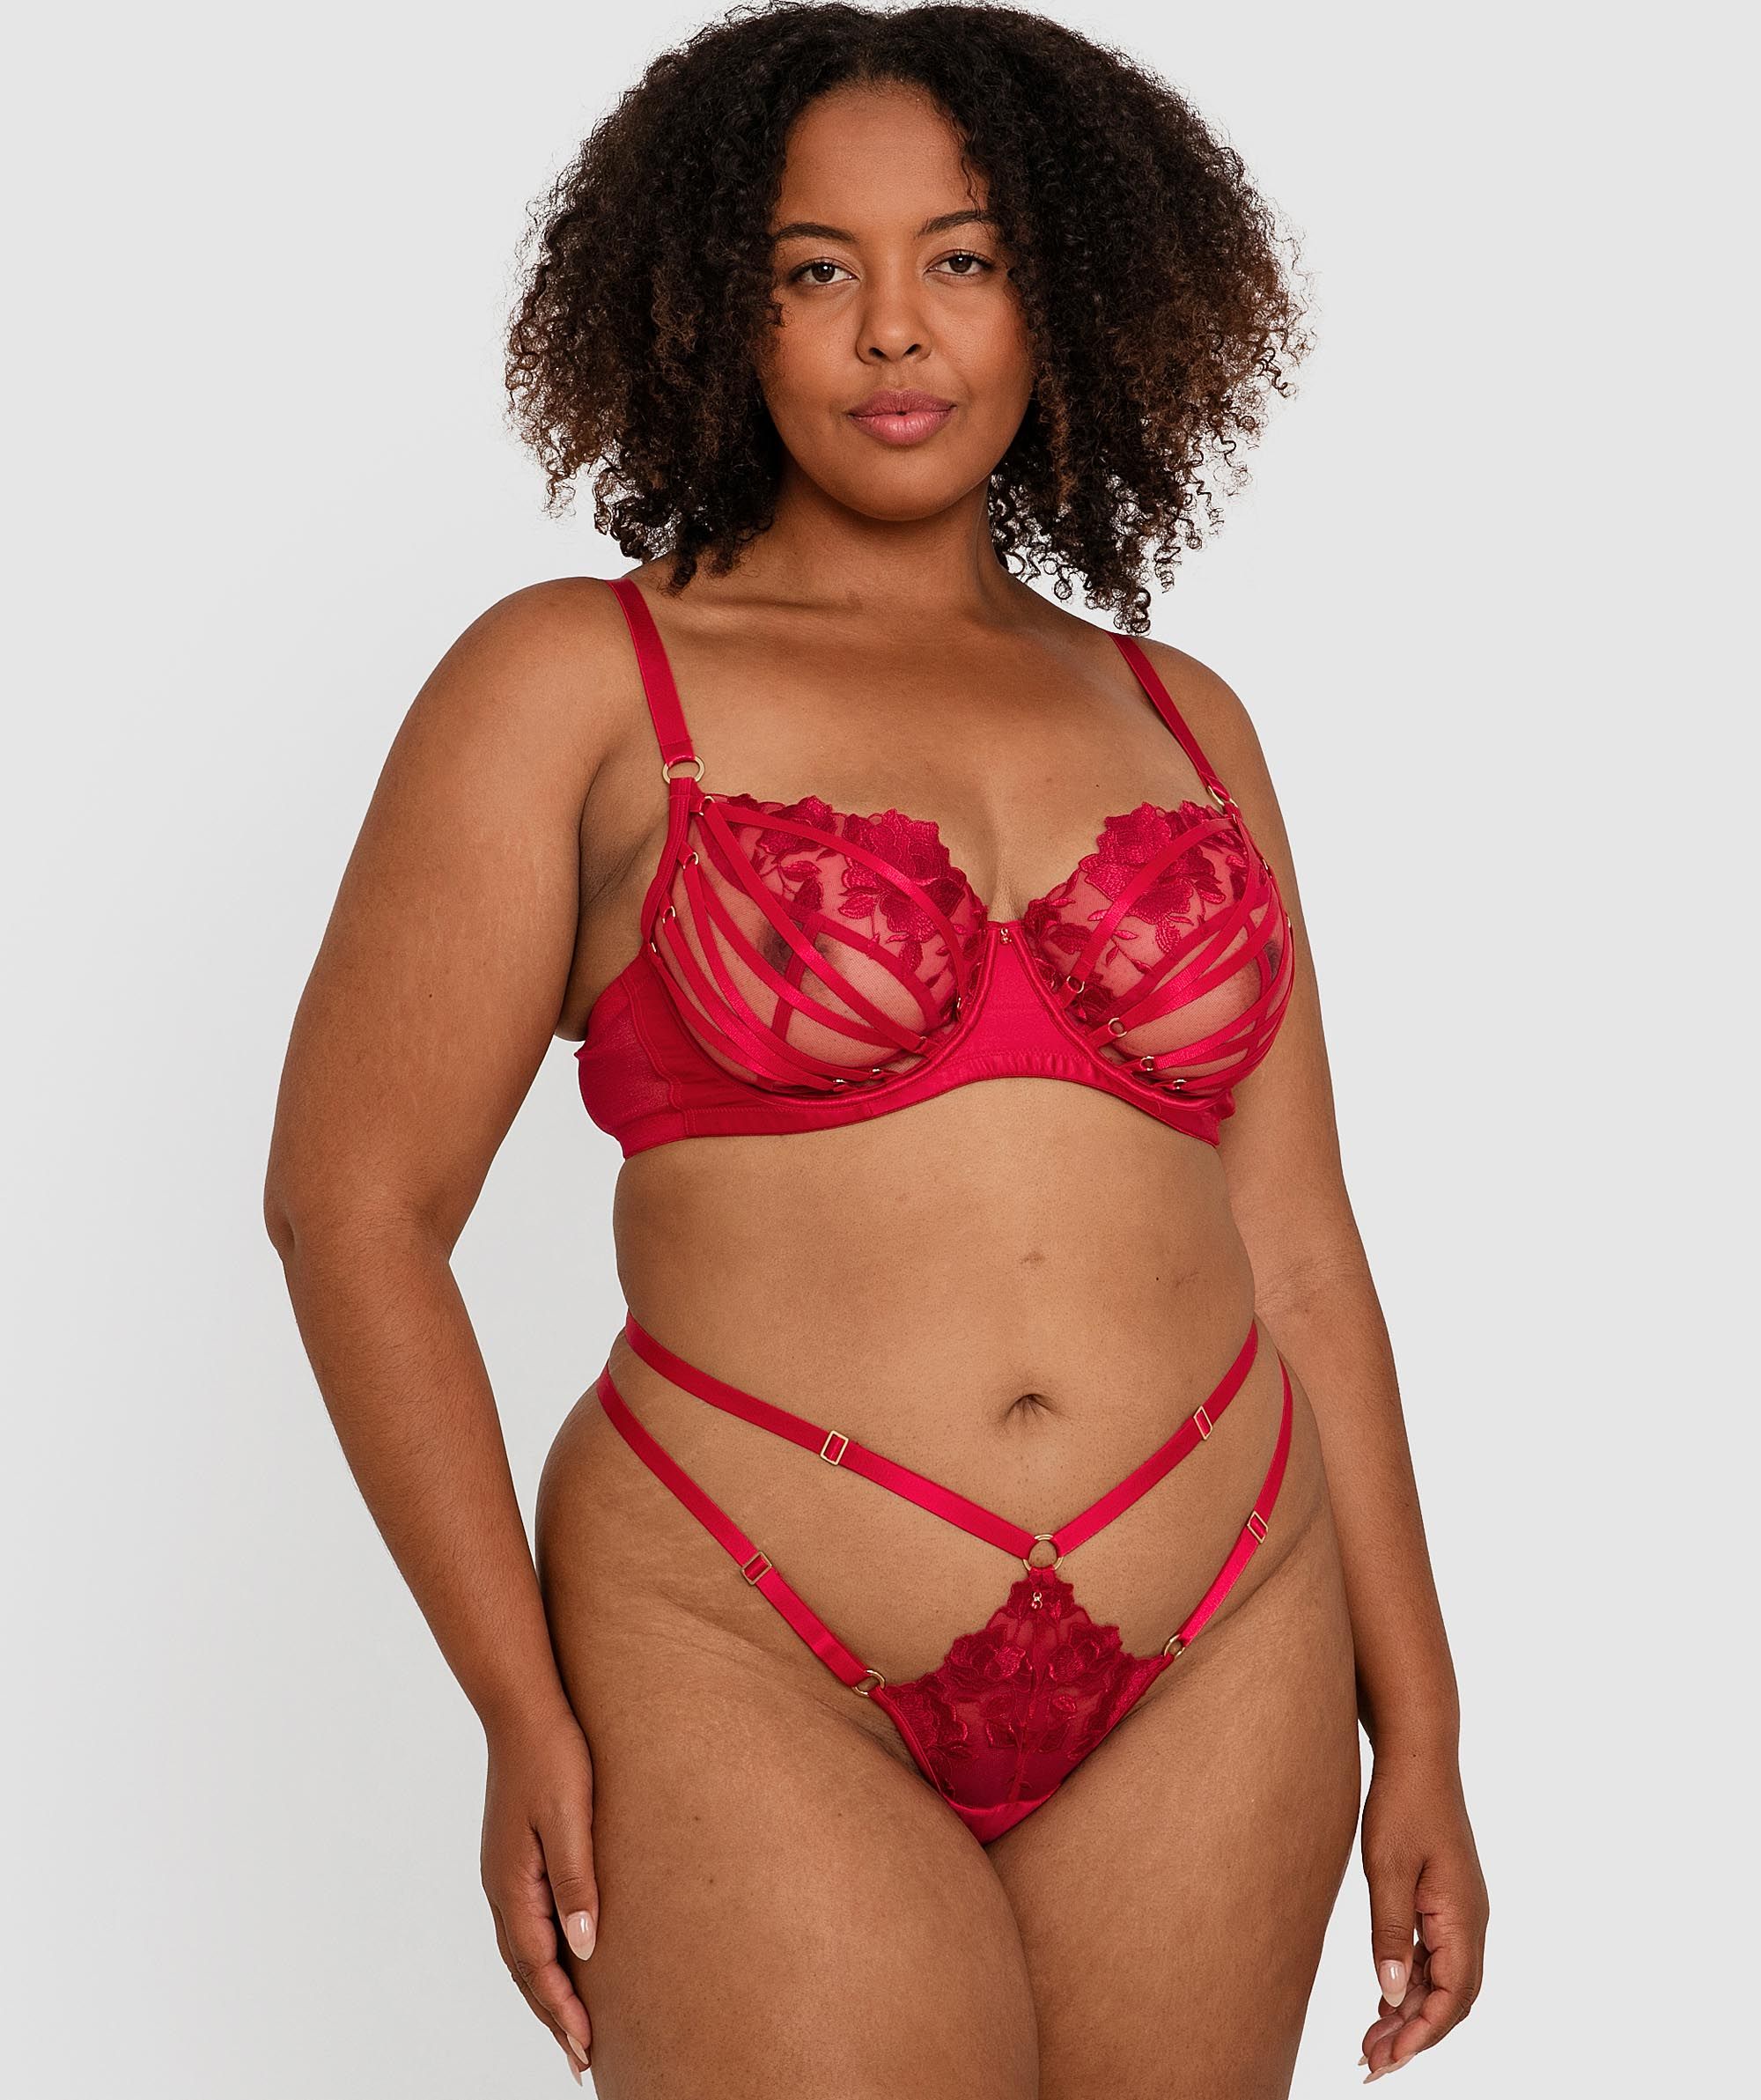 Bras N Things Night Games Showstopper Underwire Bra - Red